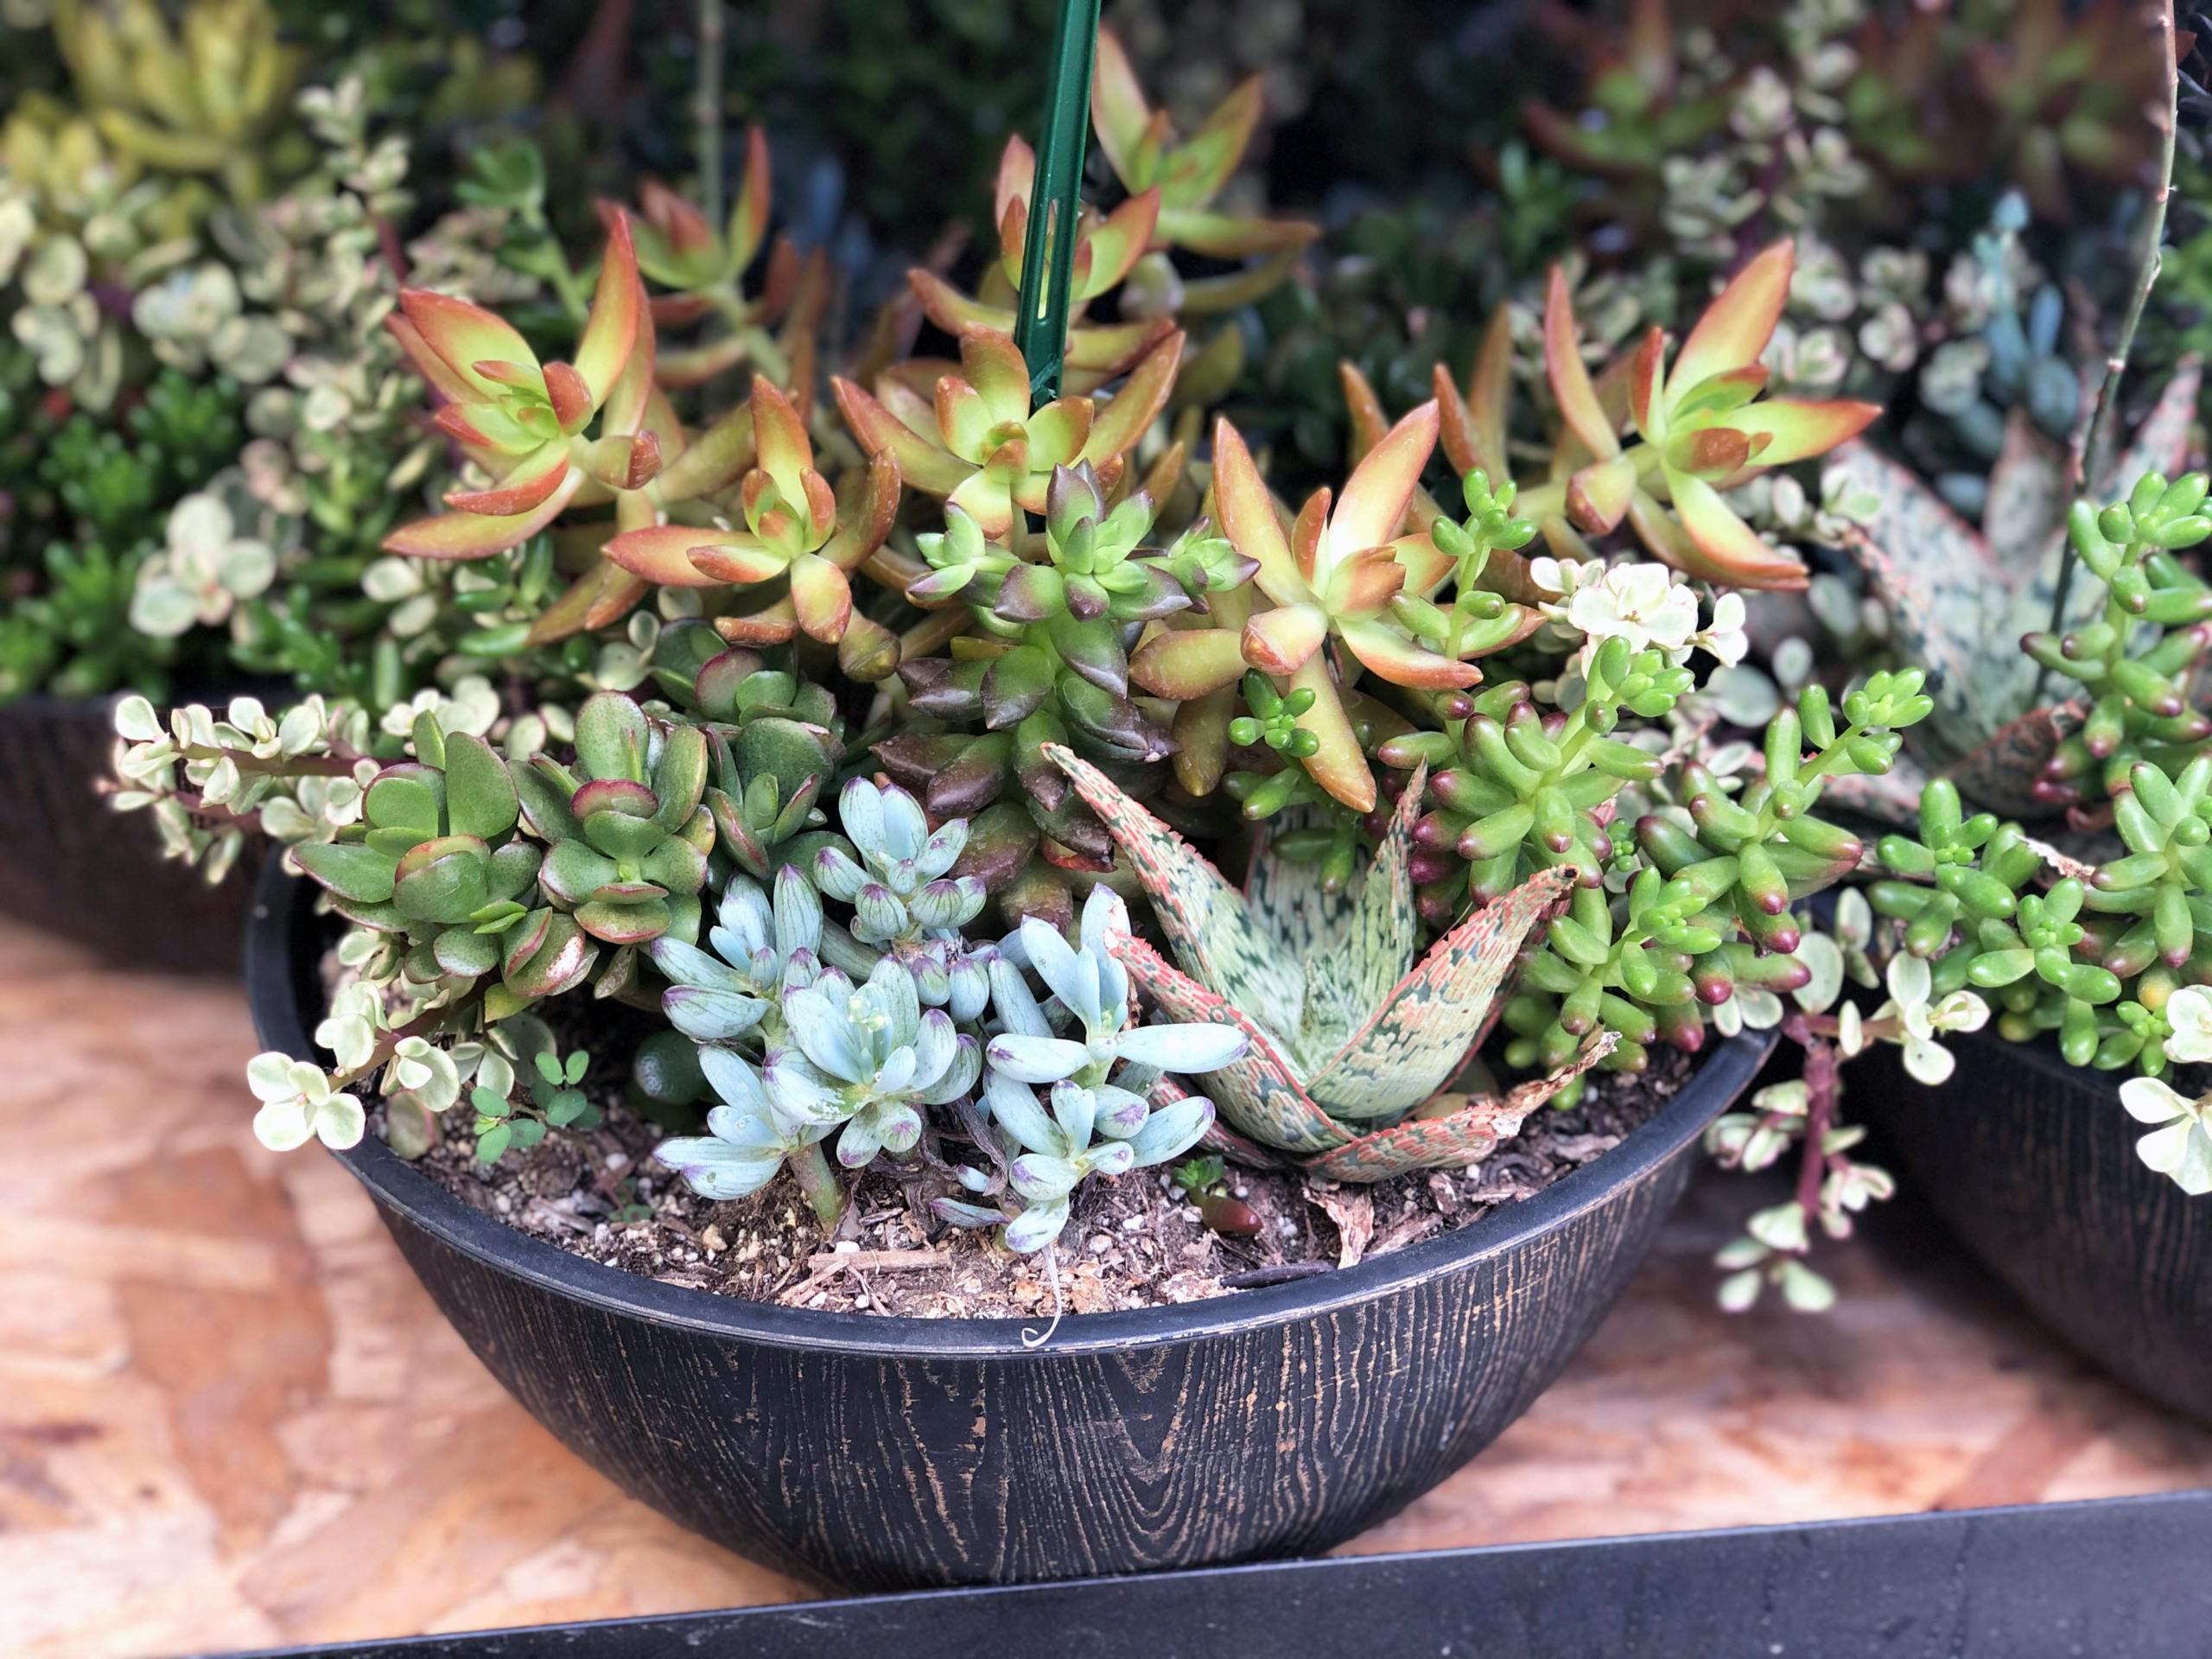 costco-is-selling-large-assorted-succulent-planters-for-19-99-the